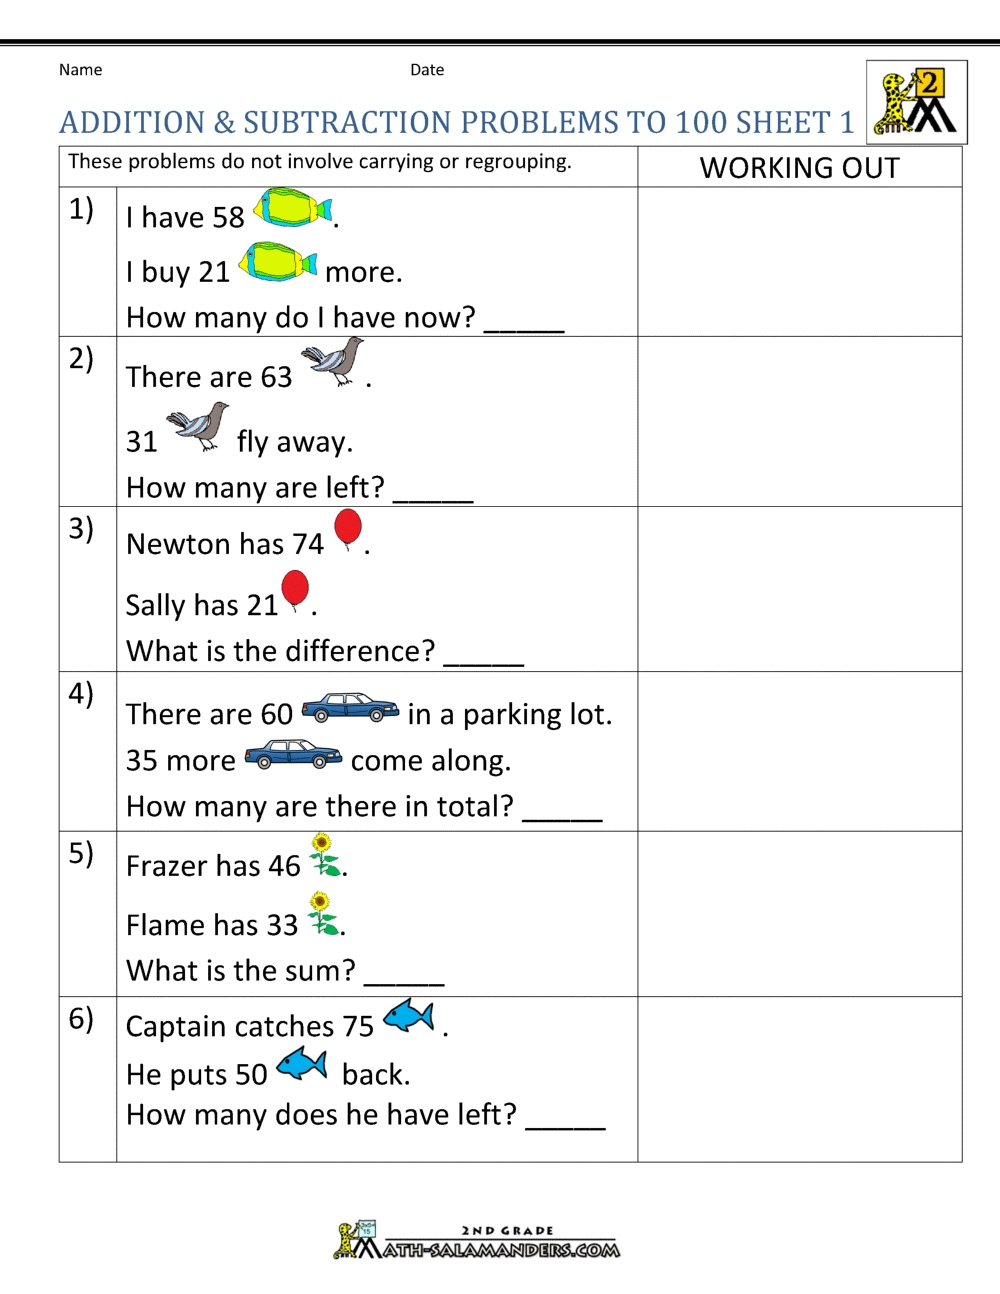 2nd grade math worksheets word problems